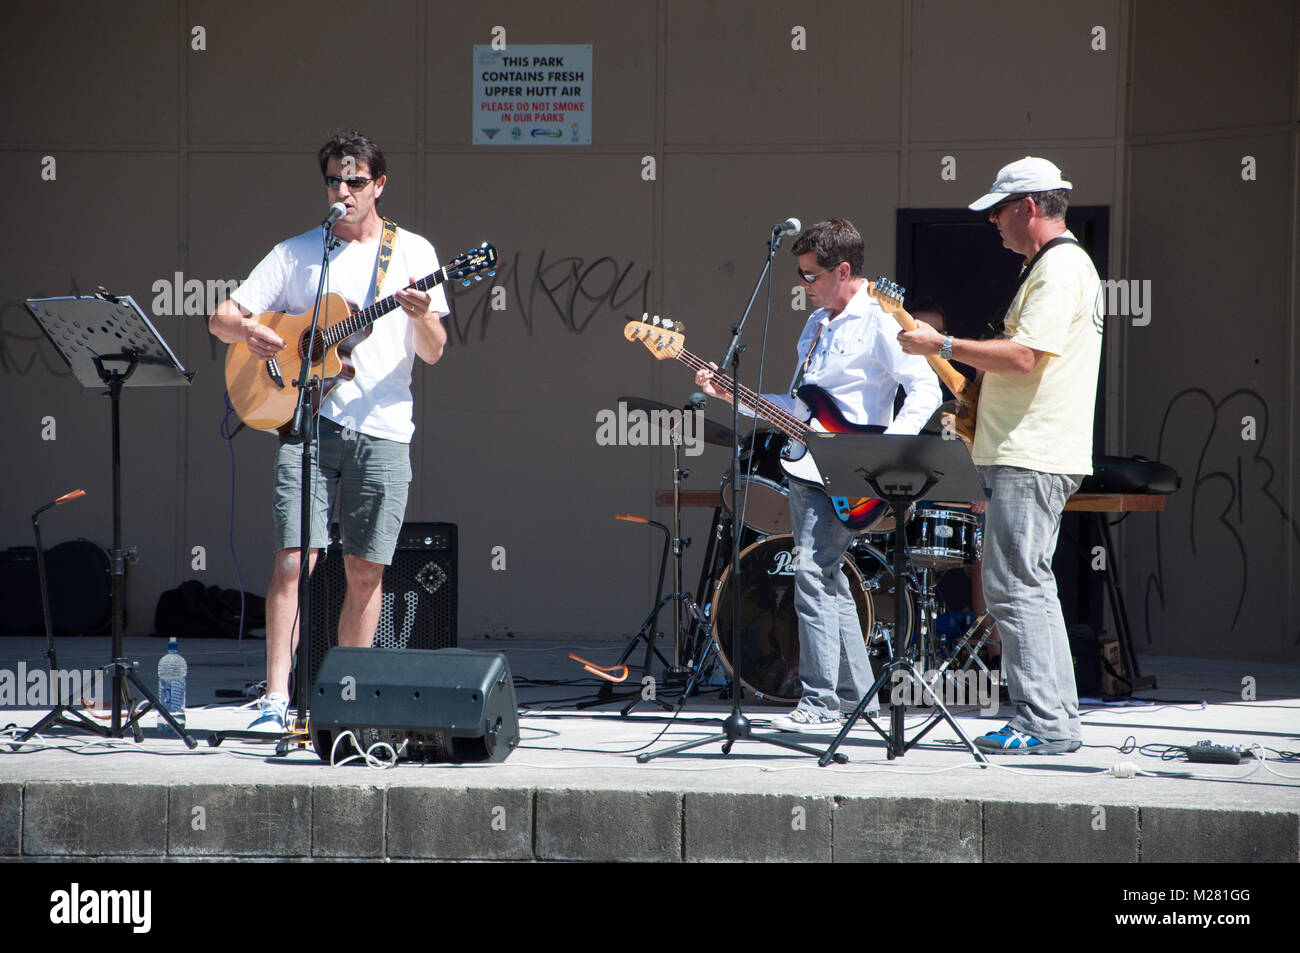 Guitarists On Stage Performing Stock Photo